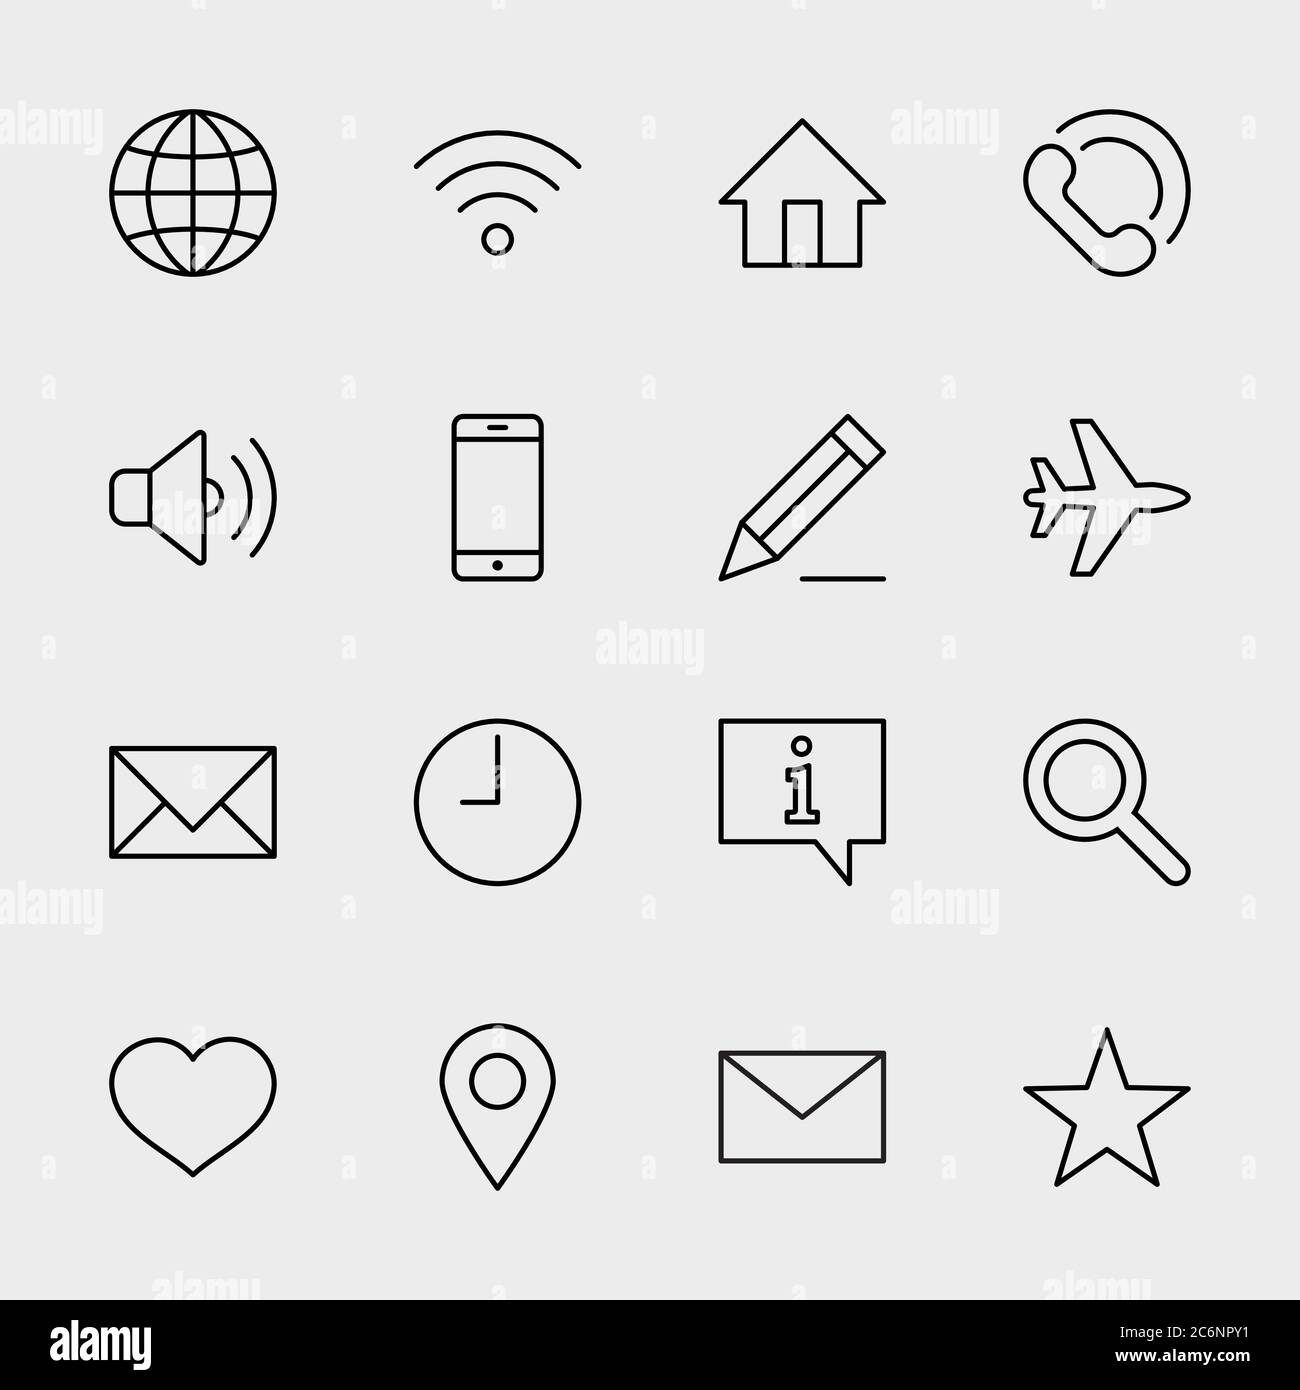 Web Line Icons. Icon Globe, Wi-fi, Home, Heart, Phone Time Star. Editable Stroke Stock Vector